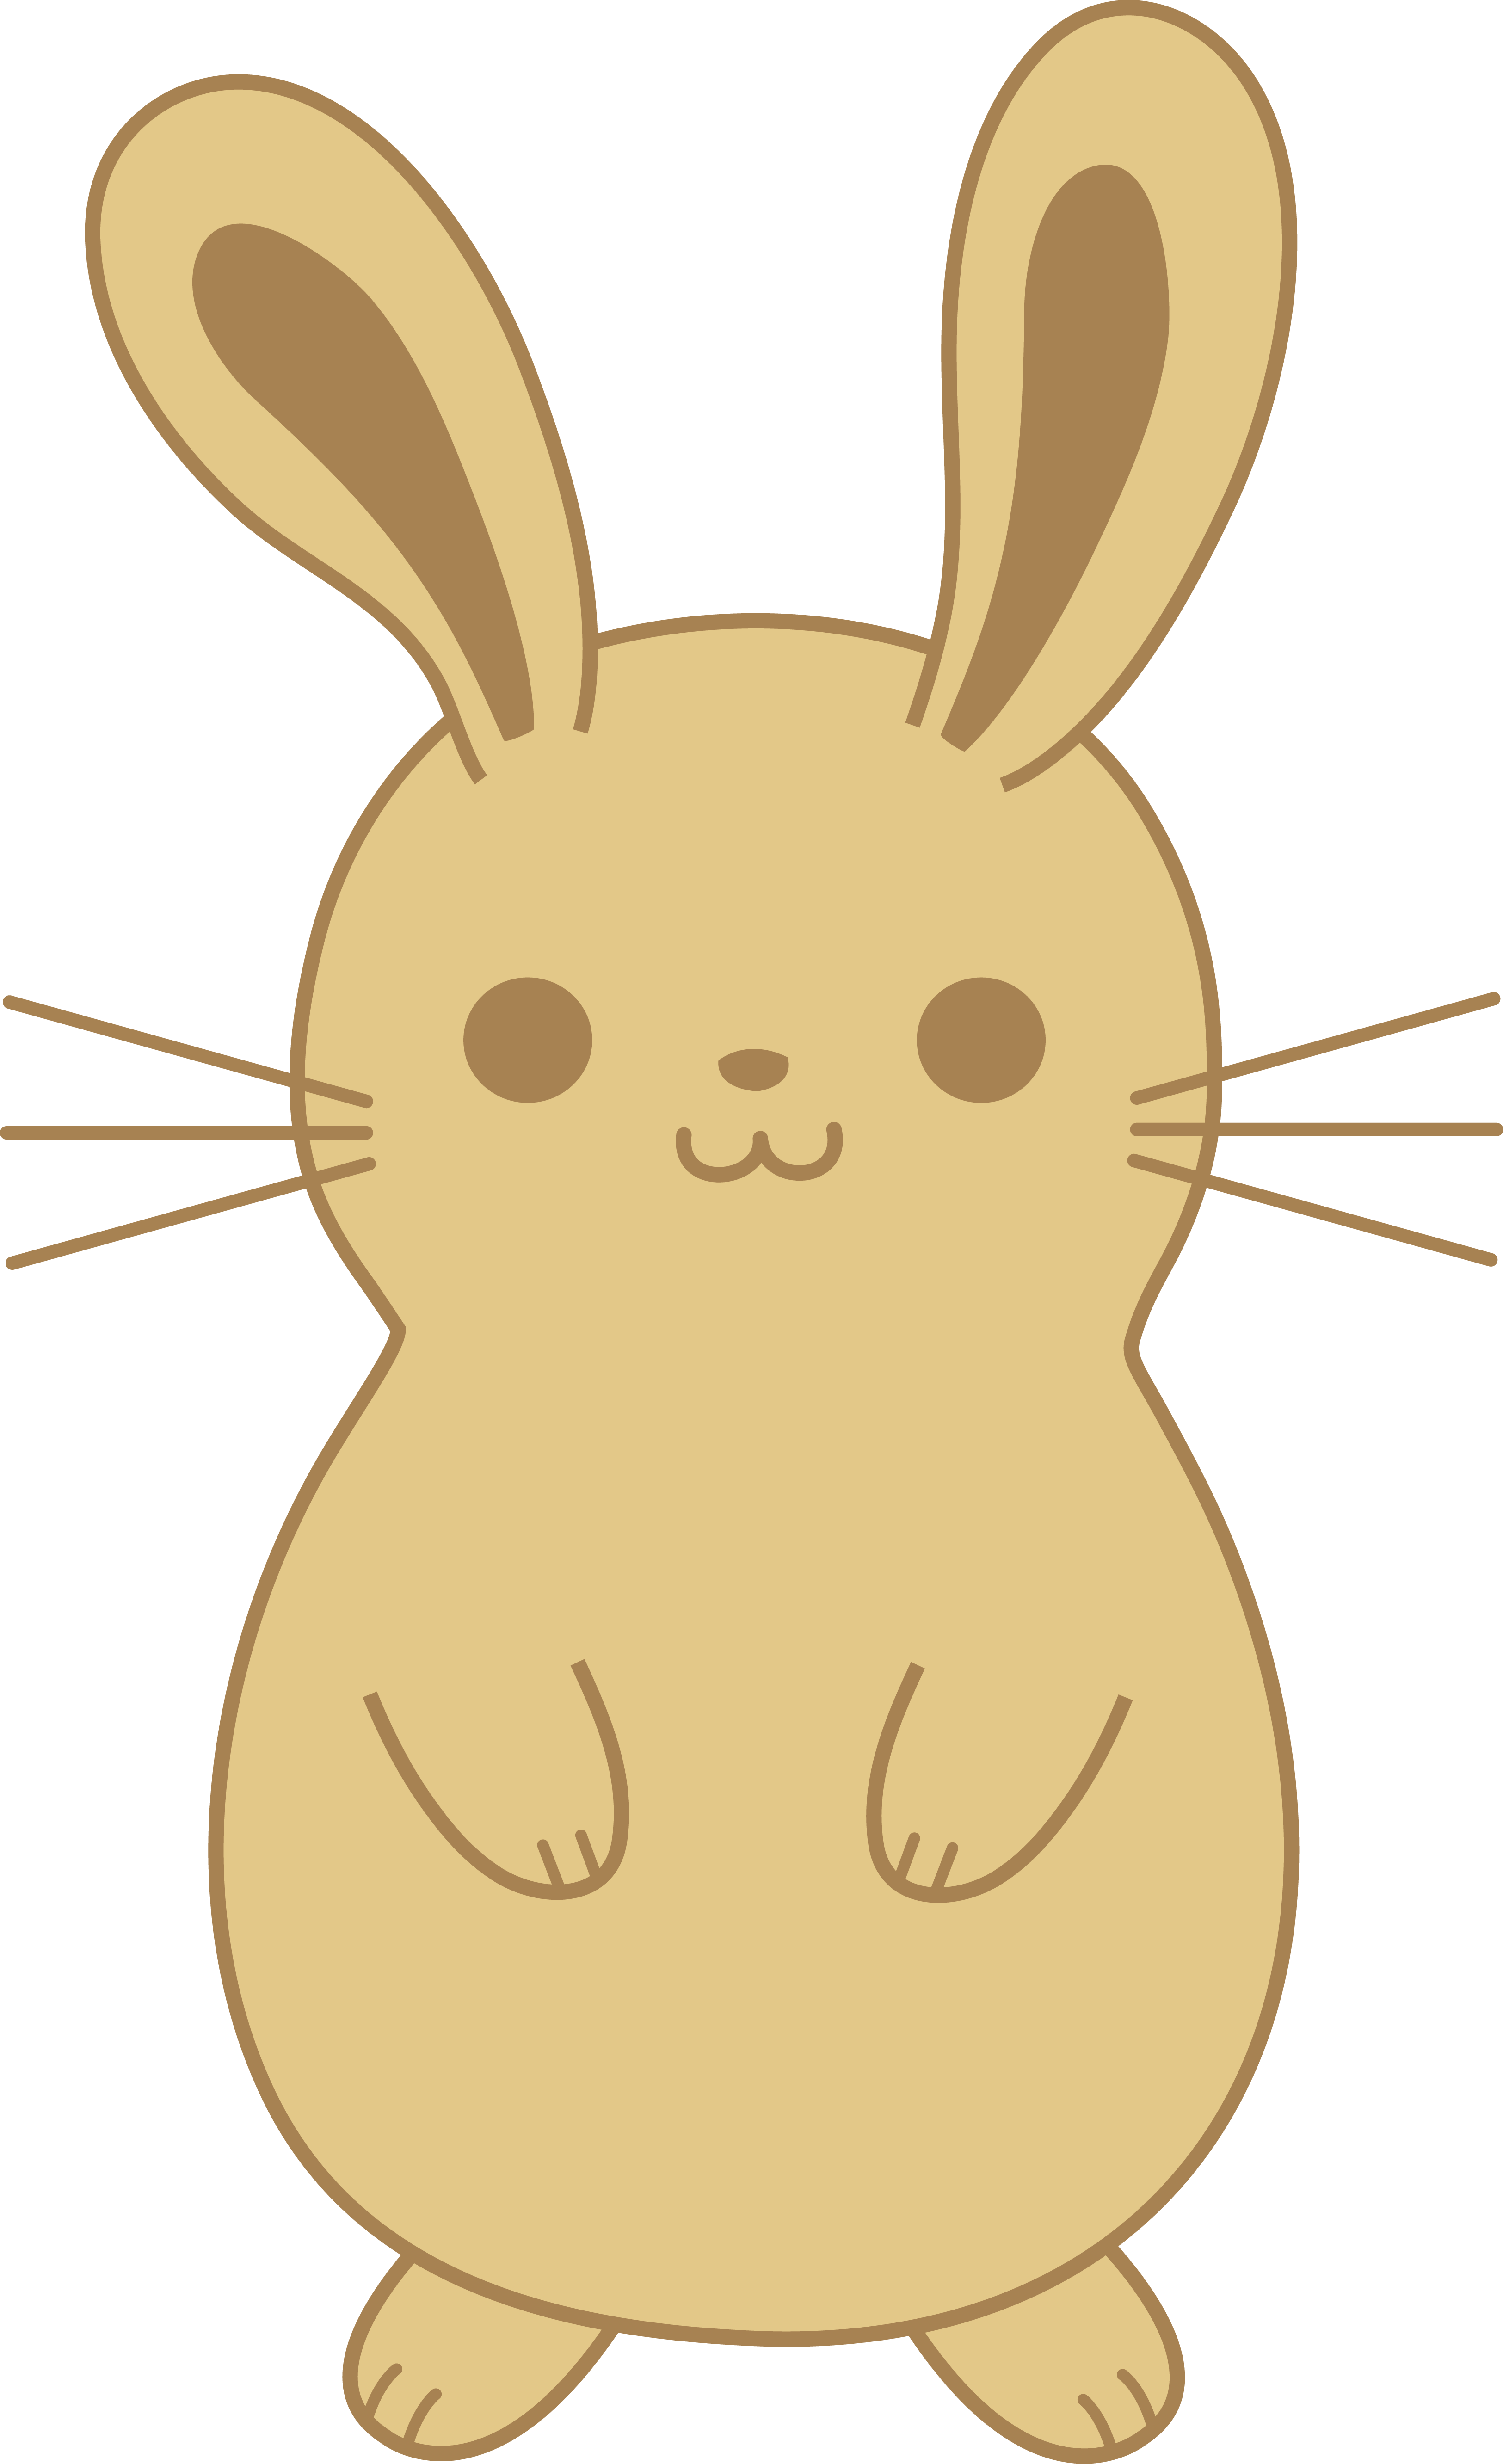 Cute Animated Bunny Pictures - Cute Little Illustration Bunny Vector ...